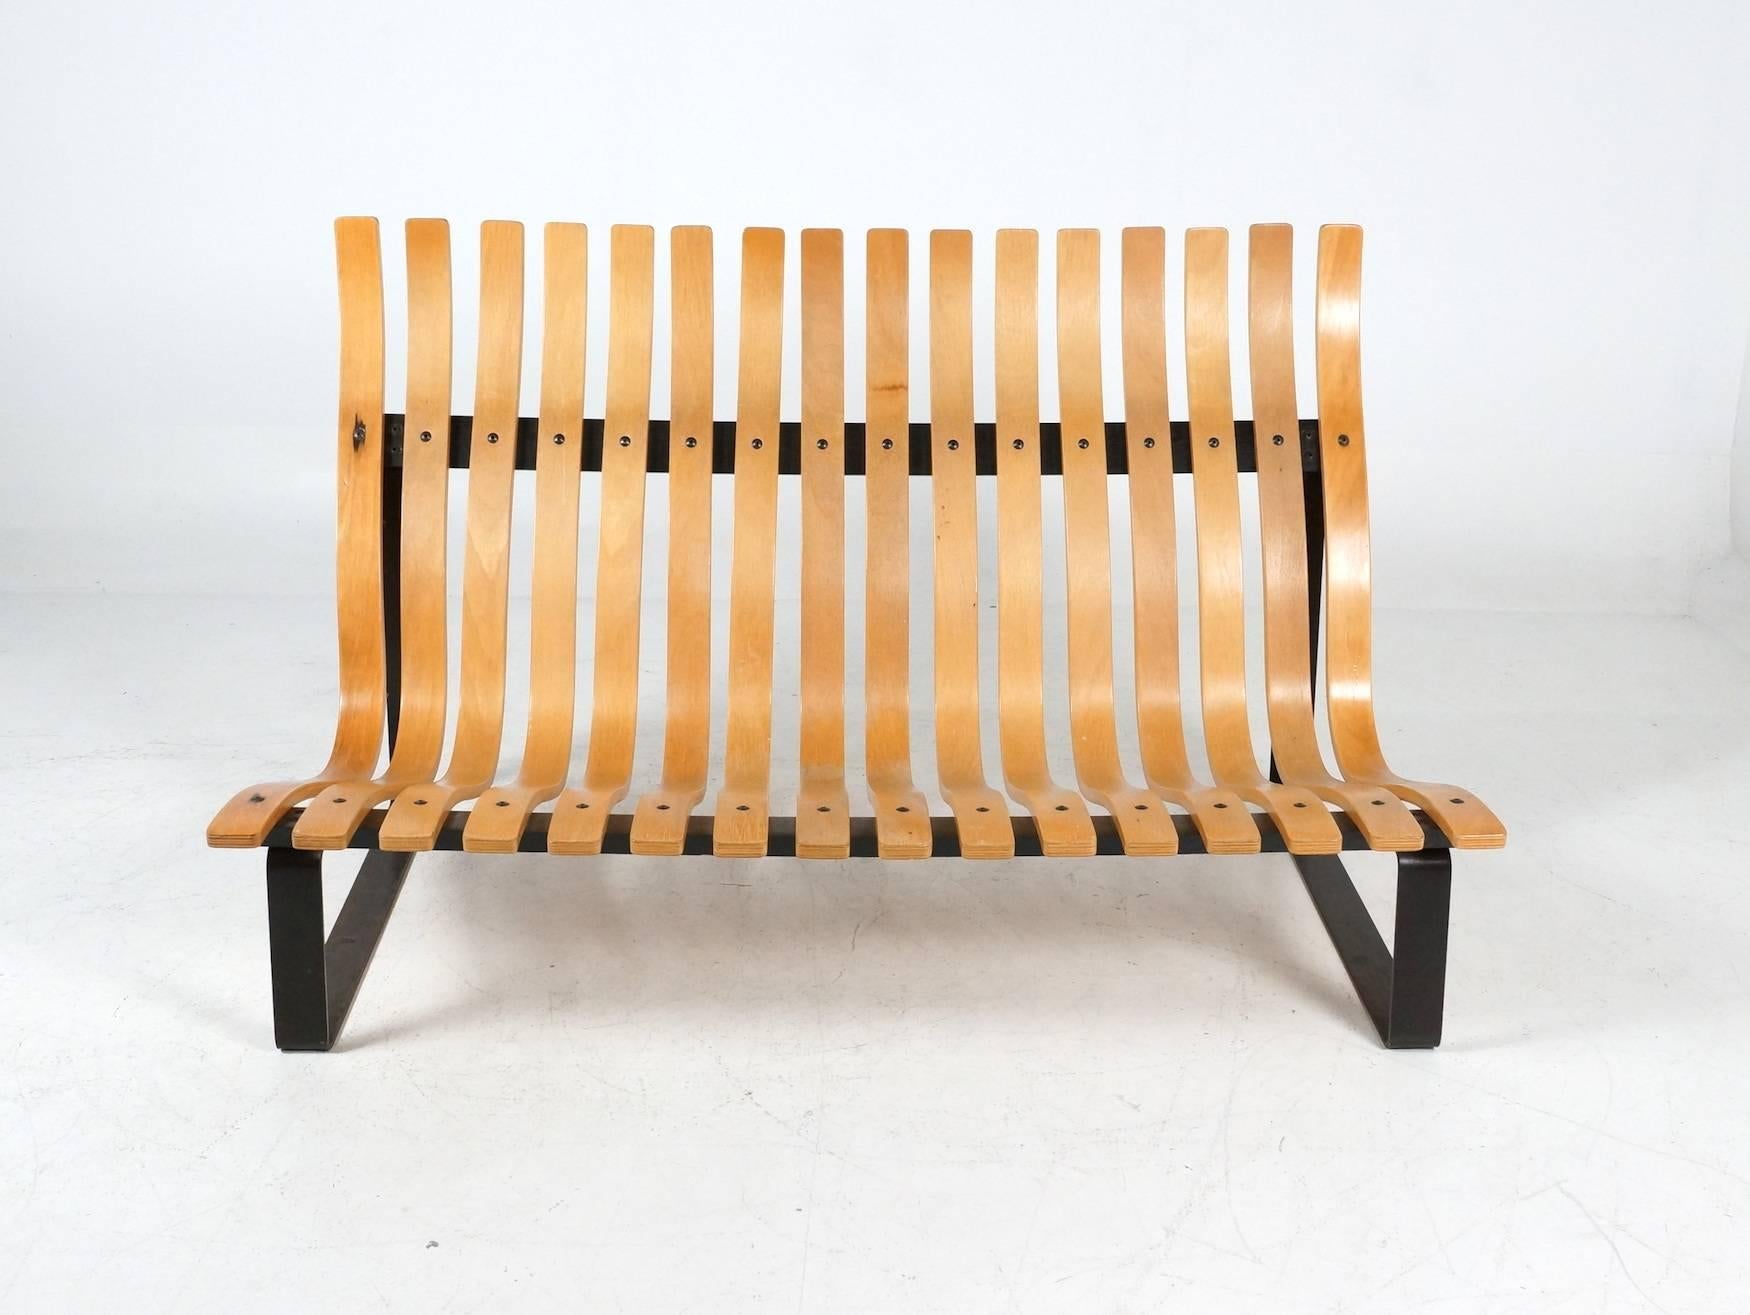 This rare and hard to find bentwood slatted bench was designed by Kho Liang Ie for Artifort at the end of the 1960s. 
The bent wooden slats with the contrasting black frame has an open character. This bench was inspired on the C683 from Artifort